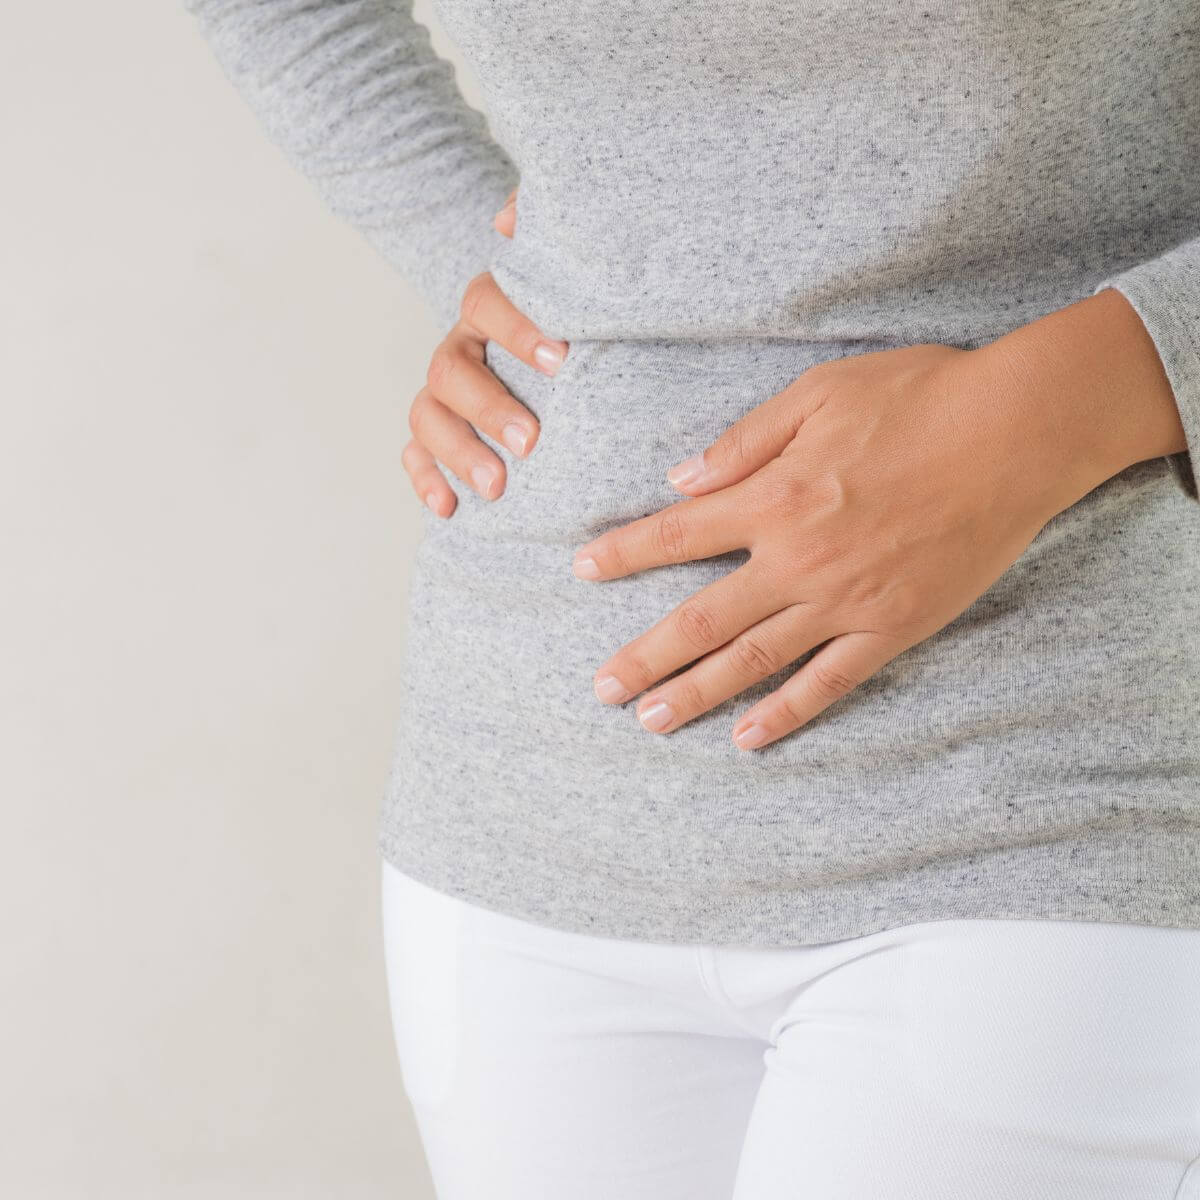 Common Causes of Bloat- How to Relieve Bloating Fast